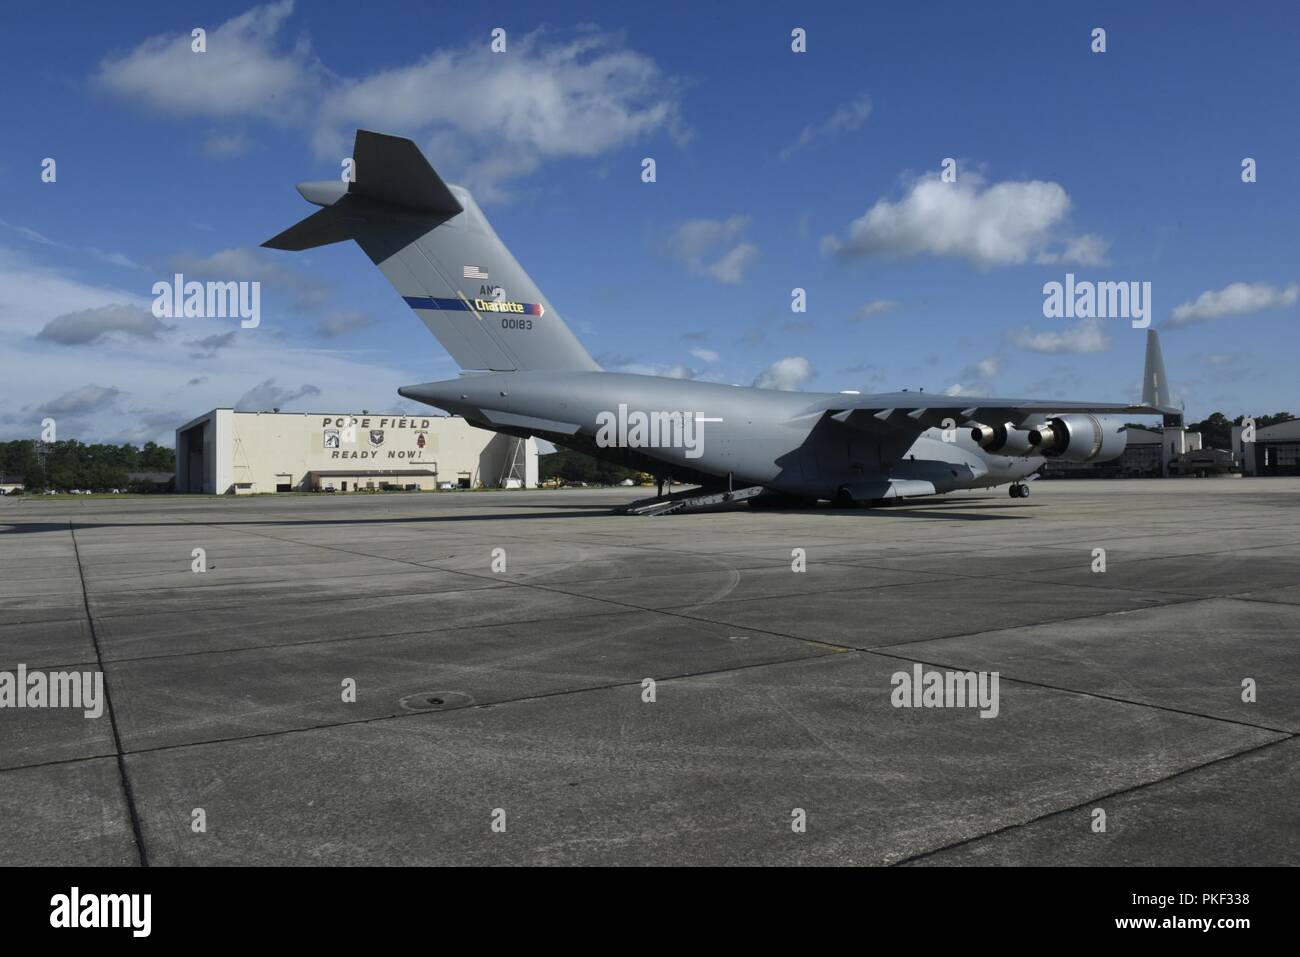 145th Airlift Wing C-17 Globemaster III Aircraft 0183 sits for the first time on the flight line of Pope Army Airfield, during the first NCANG C-17 mission to Pope Army Airfield, while at Pope Army Airfield, Fayetteville North Carolina, August 1, 2018. The mission to Pope Field is the first of what is hoped to be many, by October the 145th Airlift Wing plans to begin supporting Airdrop missions with weekly flights to Pope Field, picking up Soldiers and Cargo for regular Airborne operations. Stock Photo